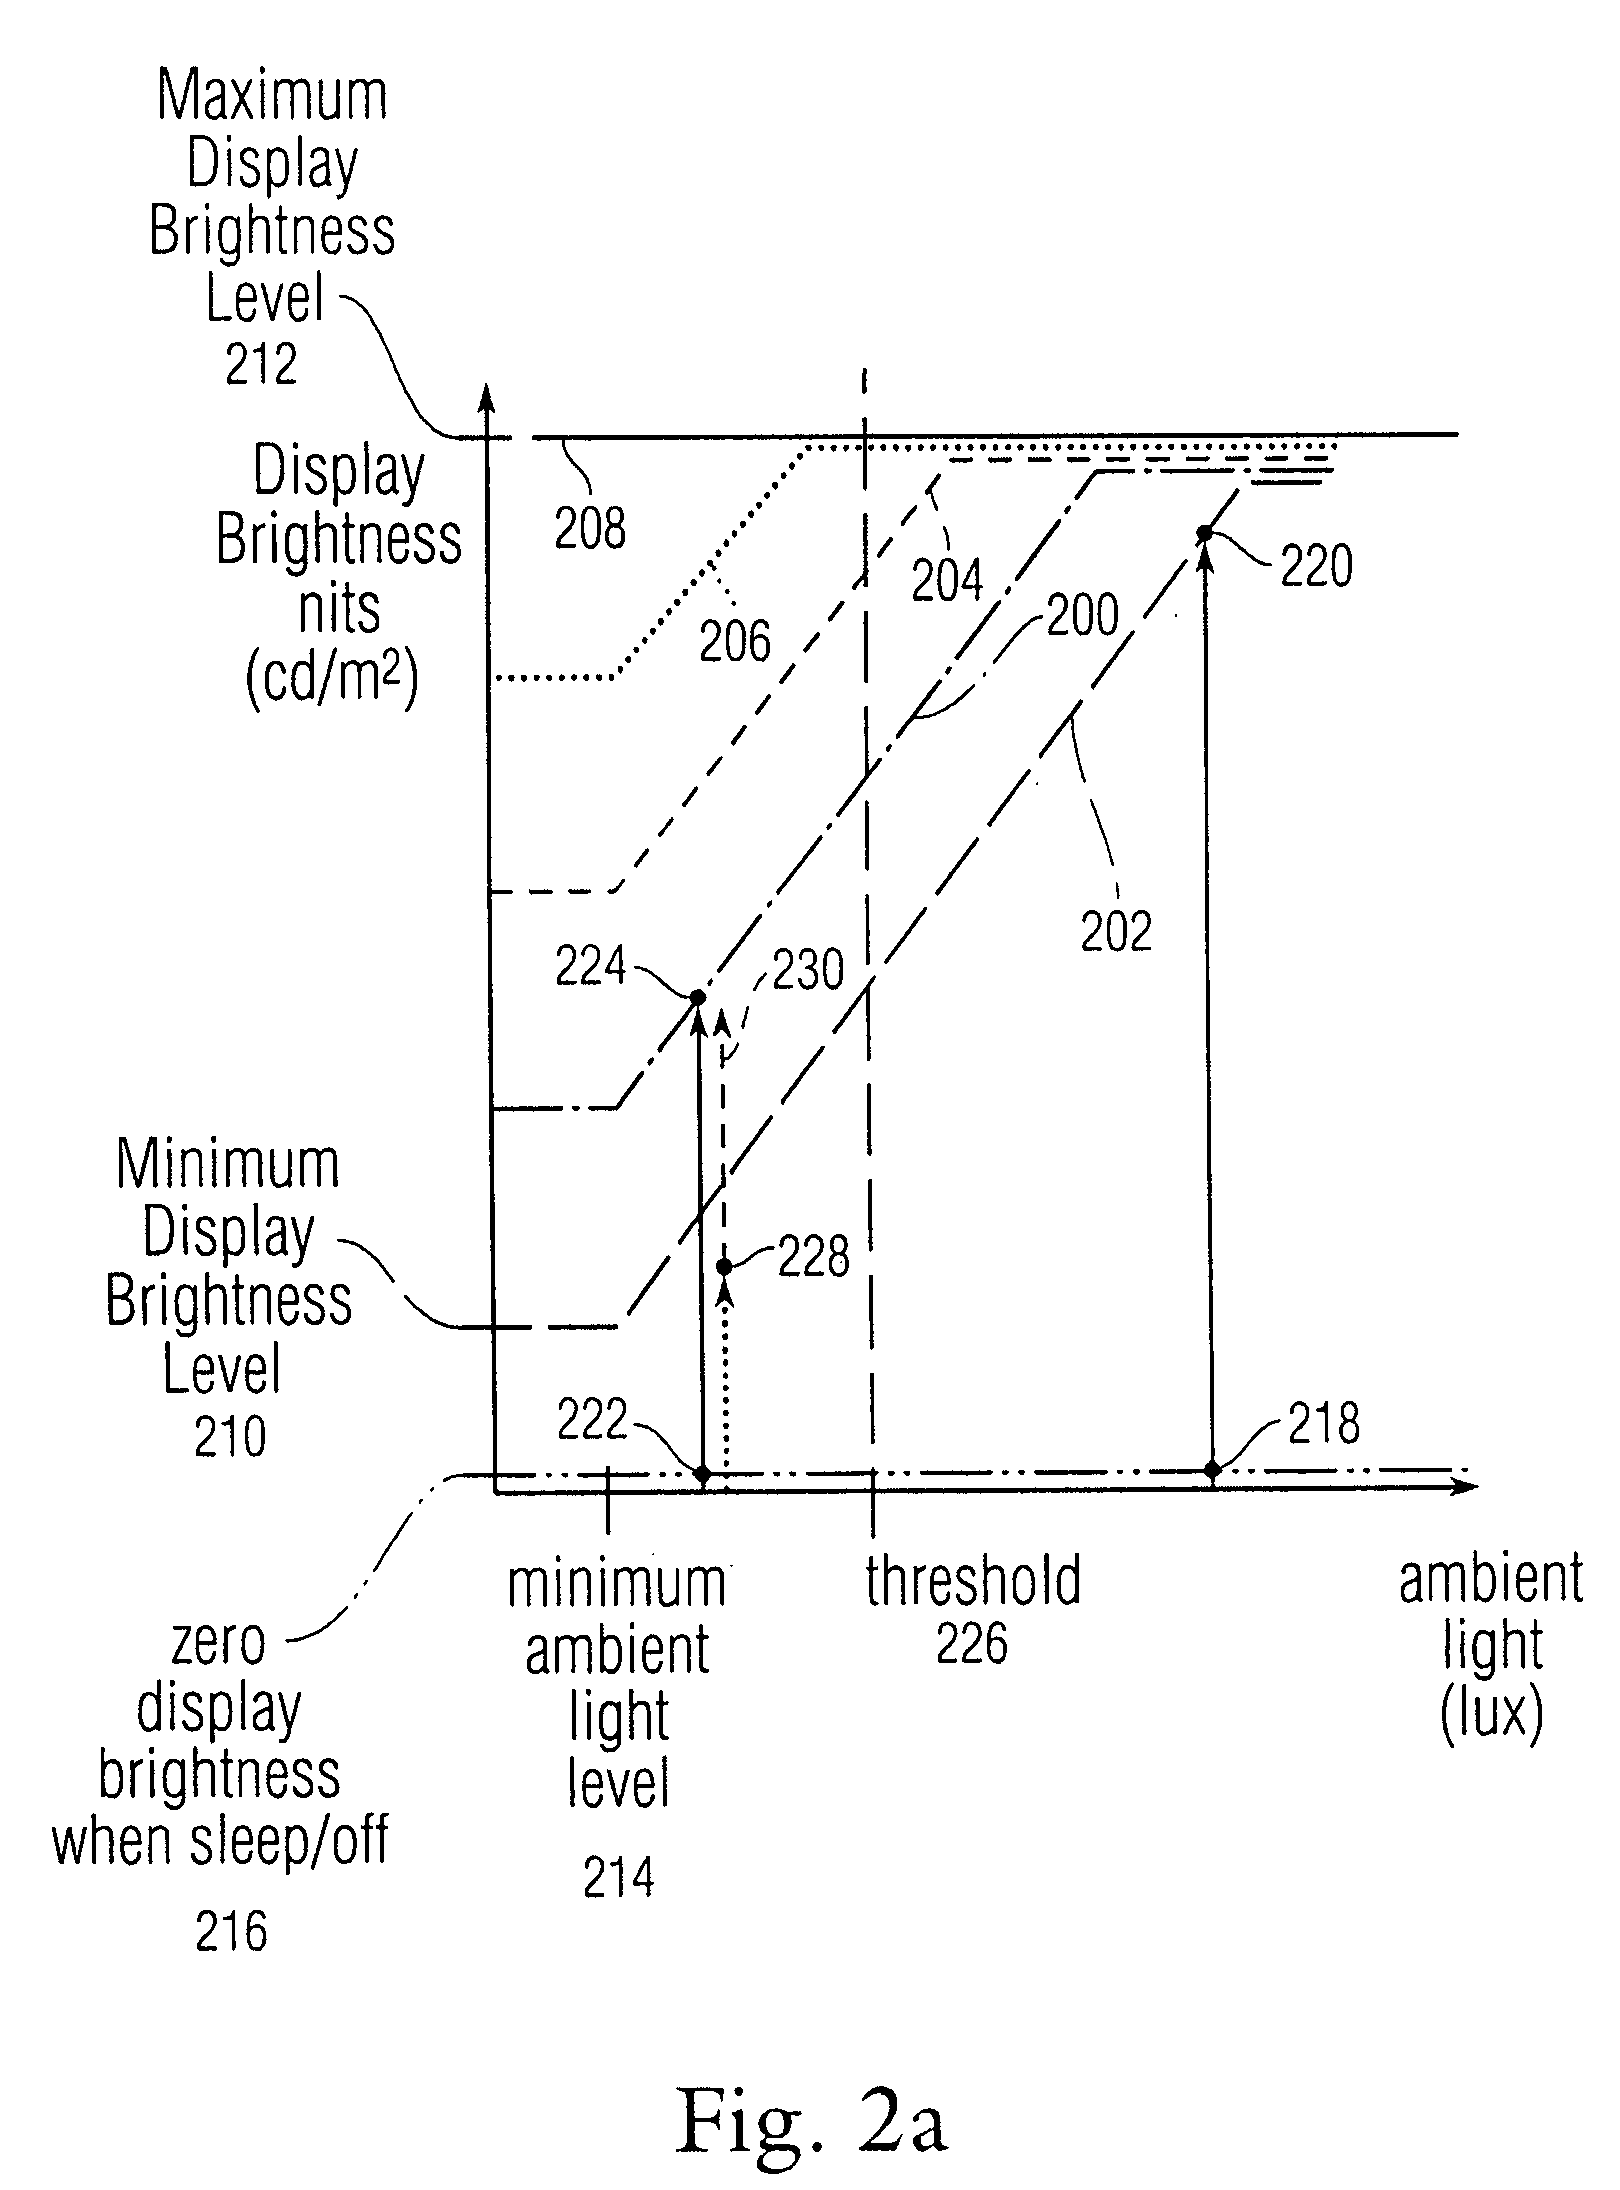 Luminescence shock avoidance in display devices